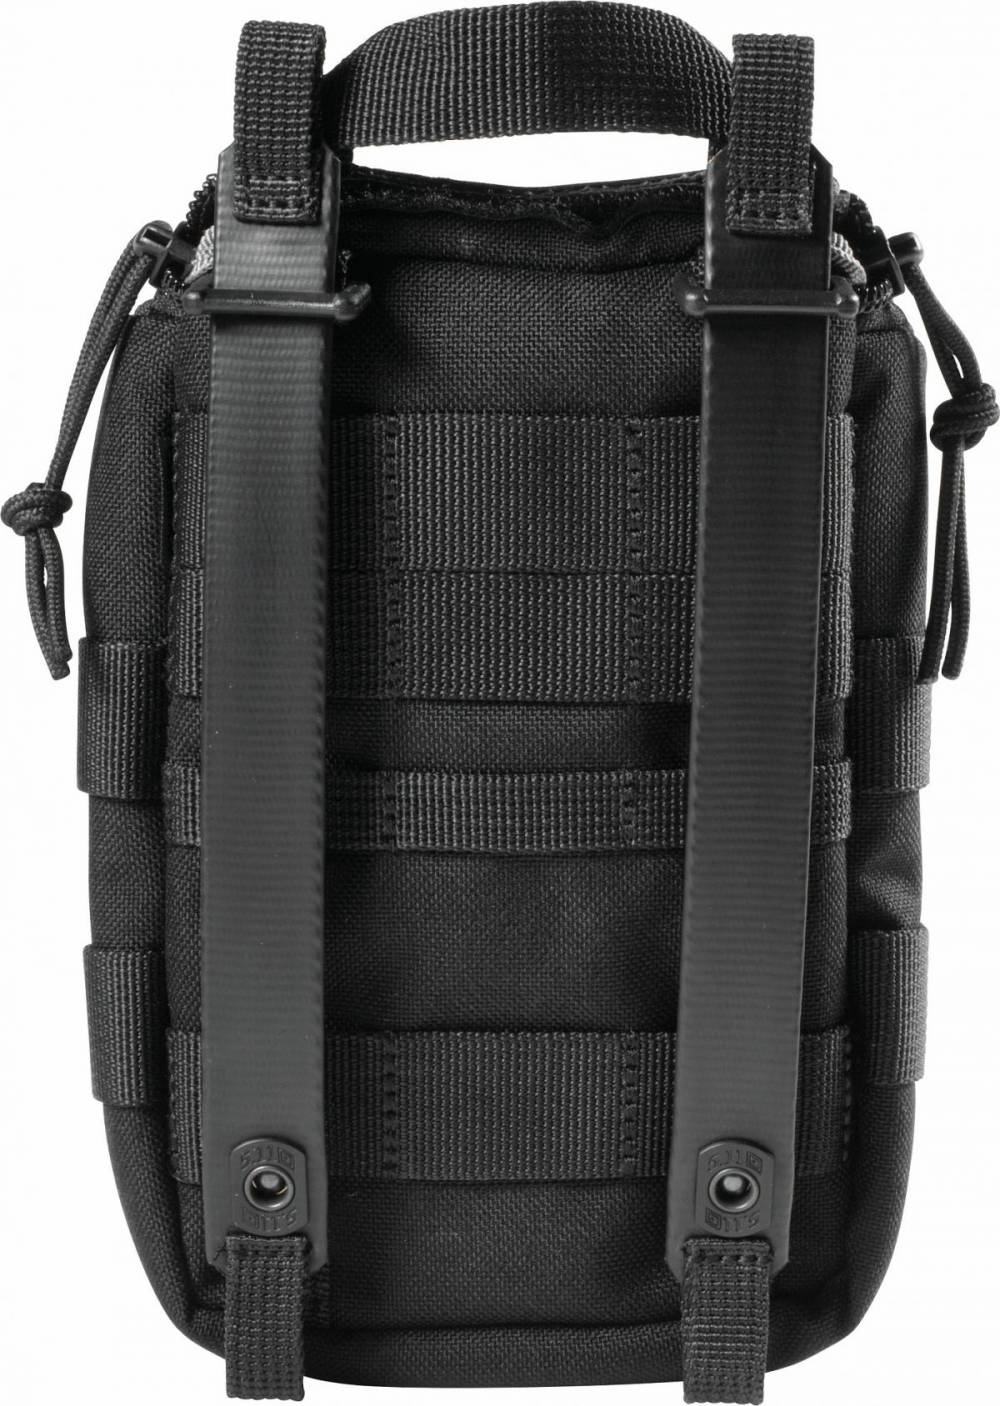 Av tactical. Подсумок 5.11 Tactical UCR IFAK Pouch. 5.11 Tactical медицинский подсумок. Подсумок медицинский 5.11 UCR IFAK Pouch, Sandstone. Подсумок Flex med Pouch 5.11.